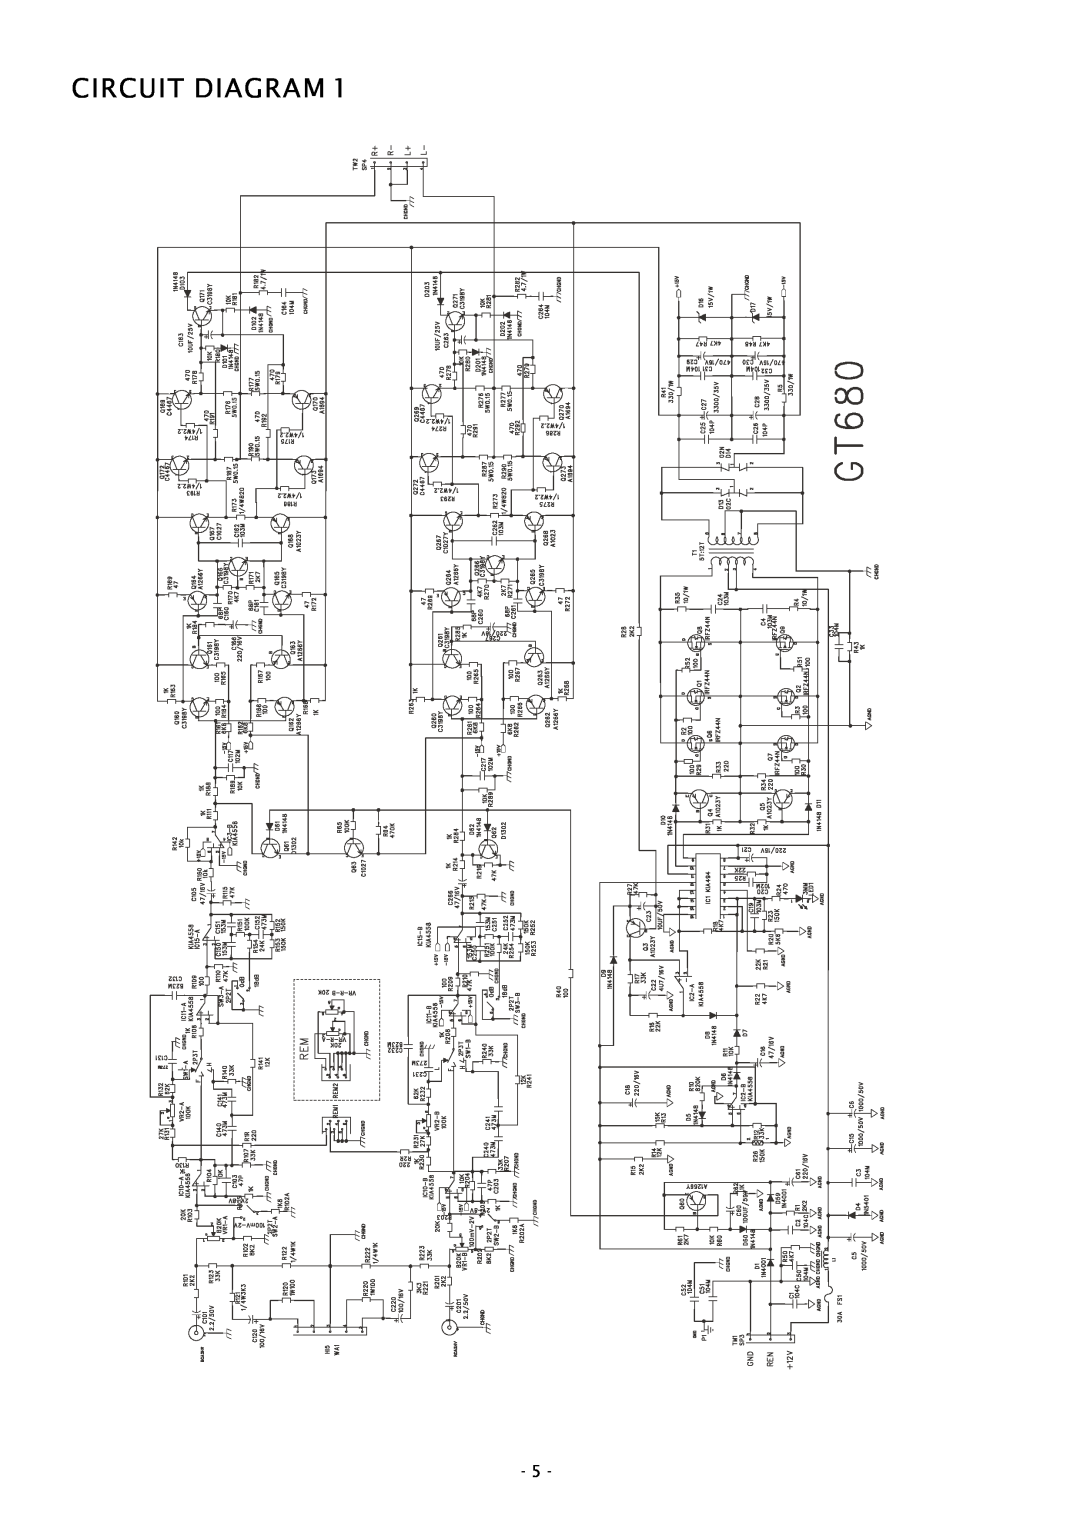 Boss Audio Systems GT680 service manual Circuit Diagram 